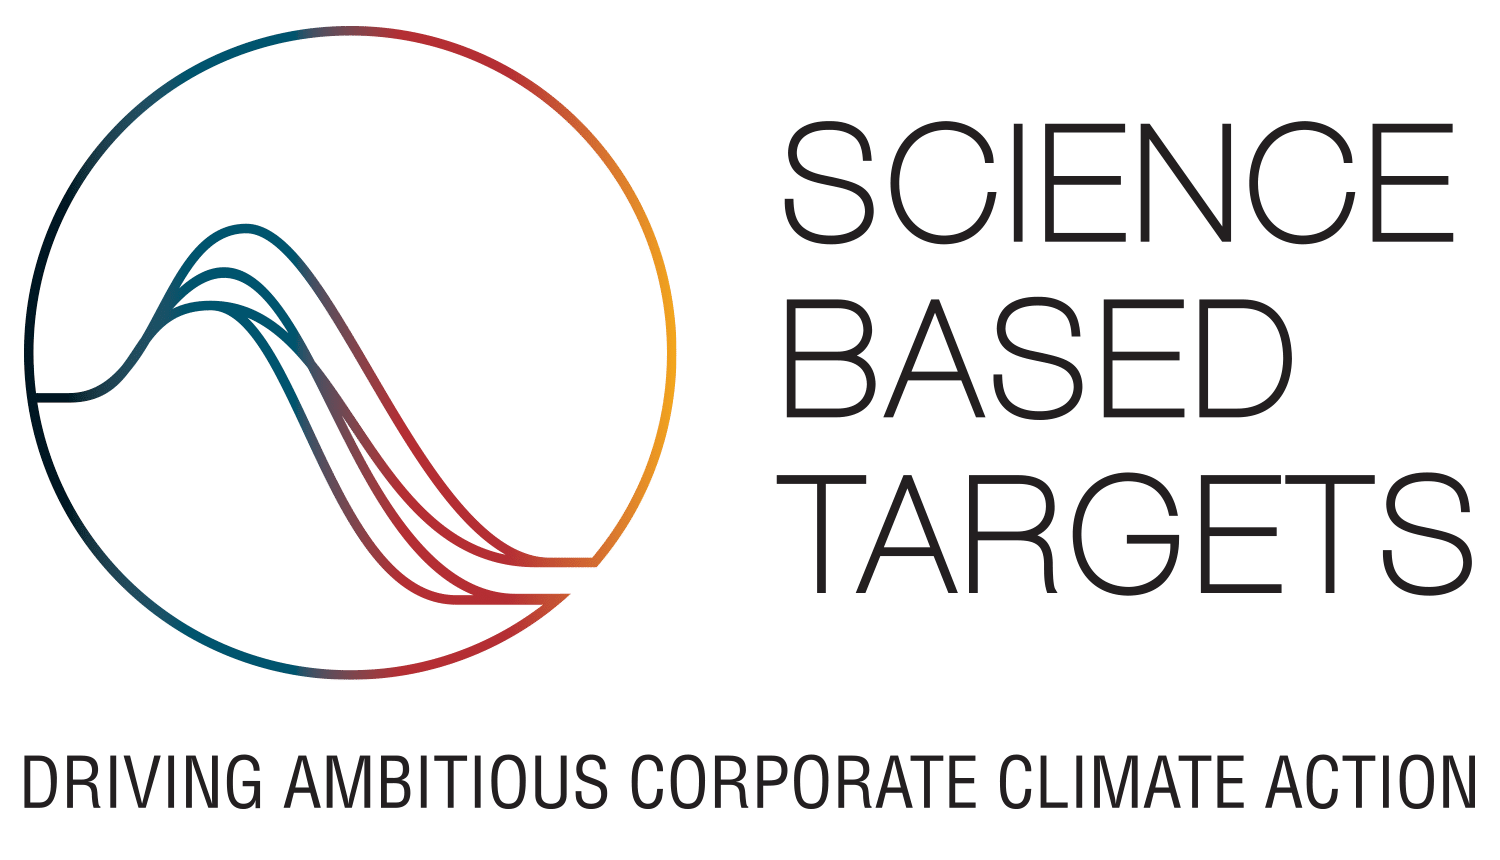 Science Based Targets: Driving ambitious corporate climate action